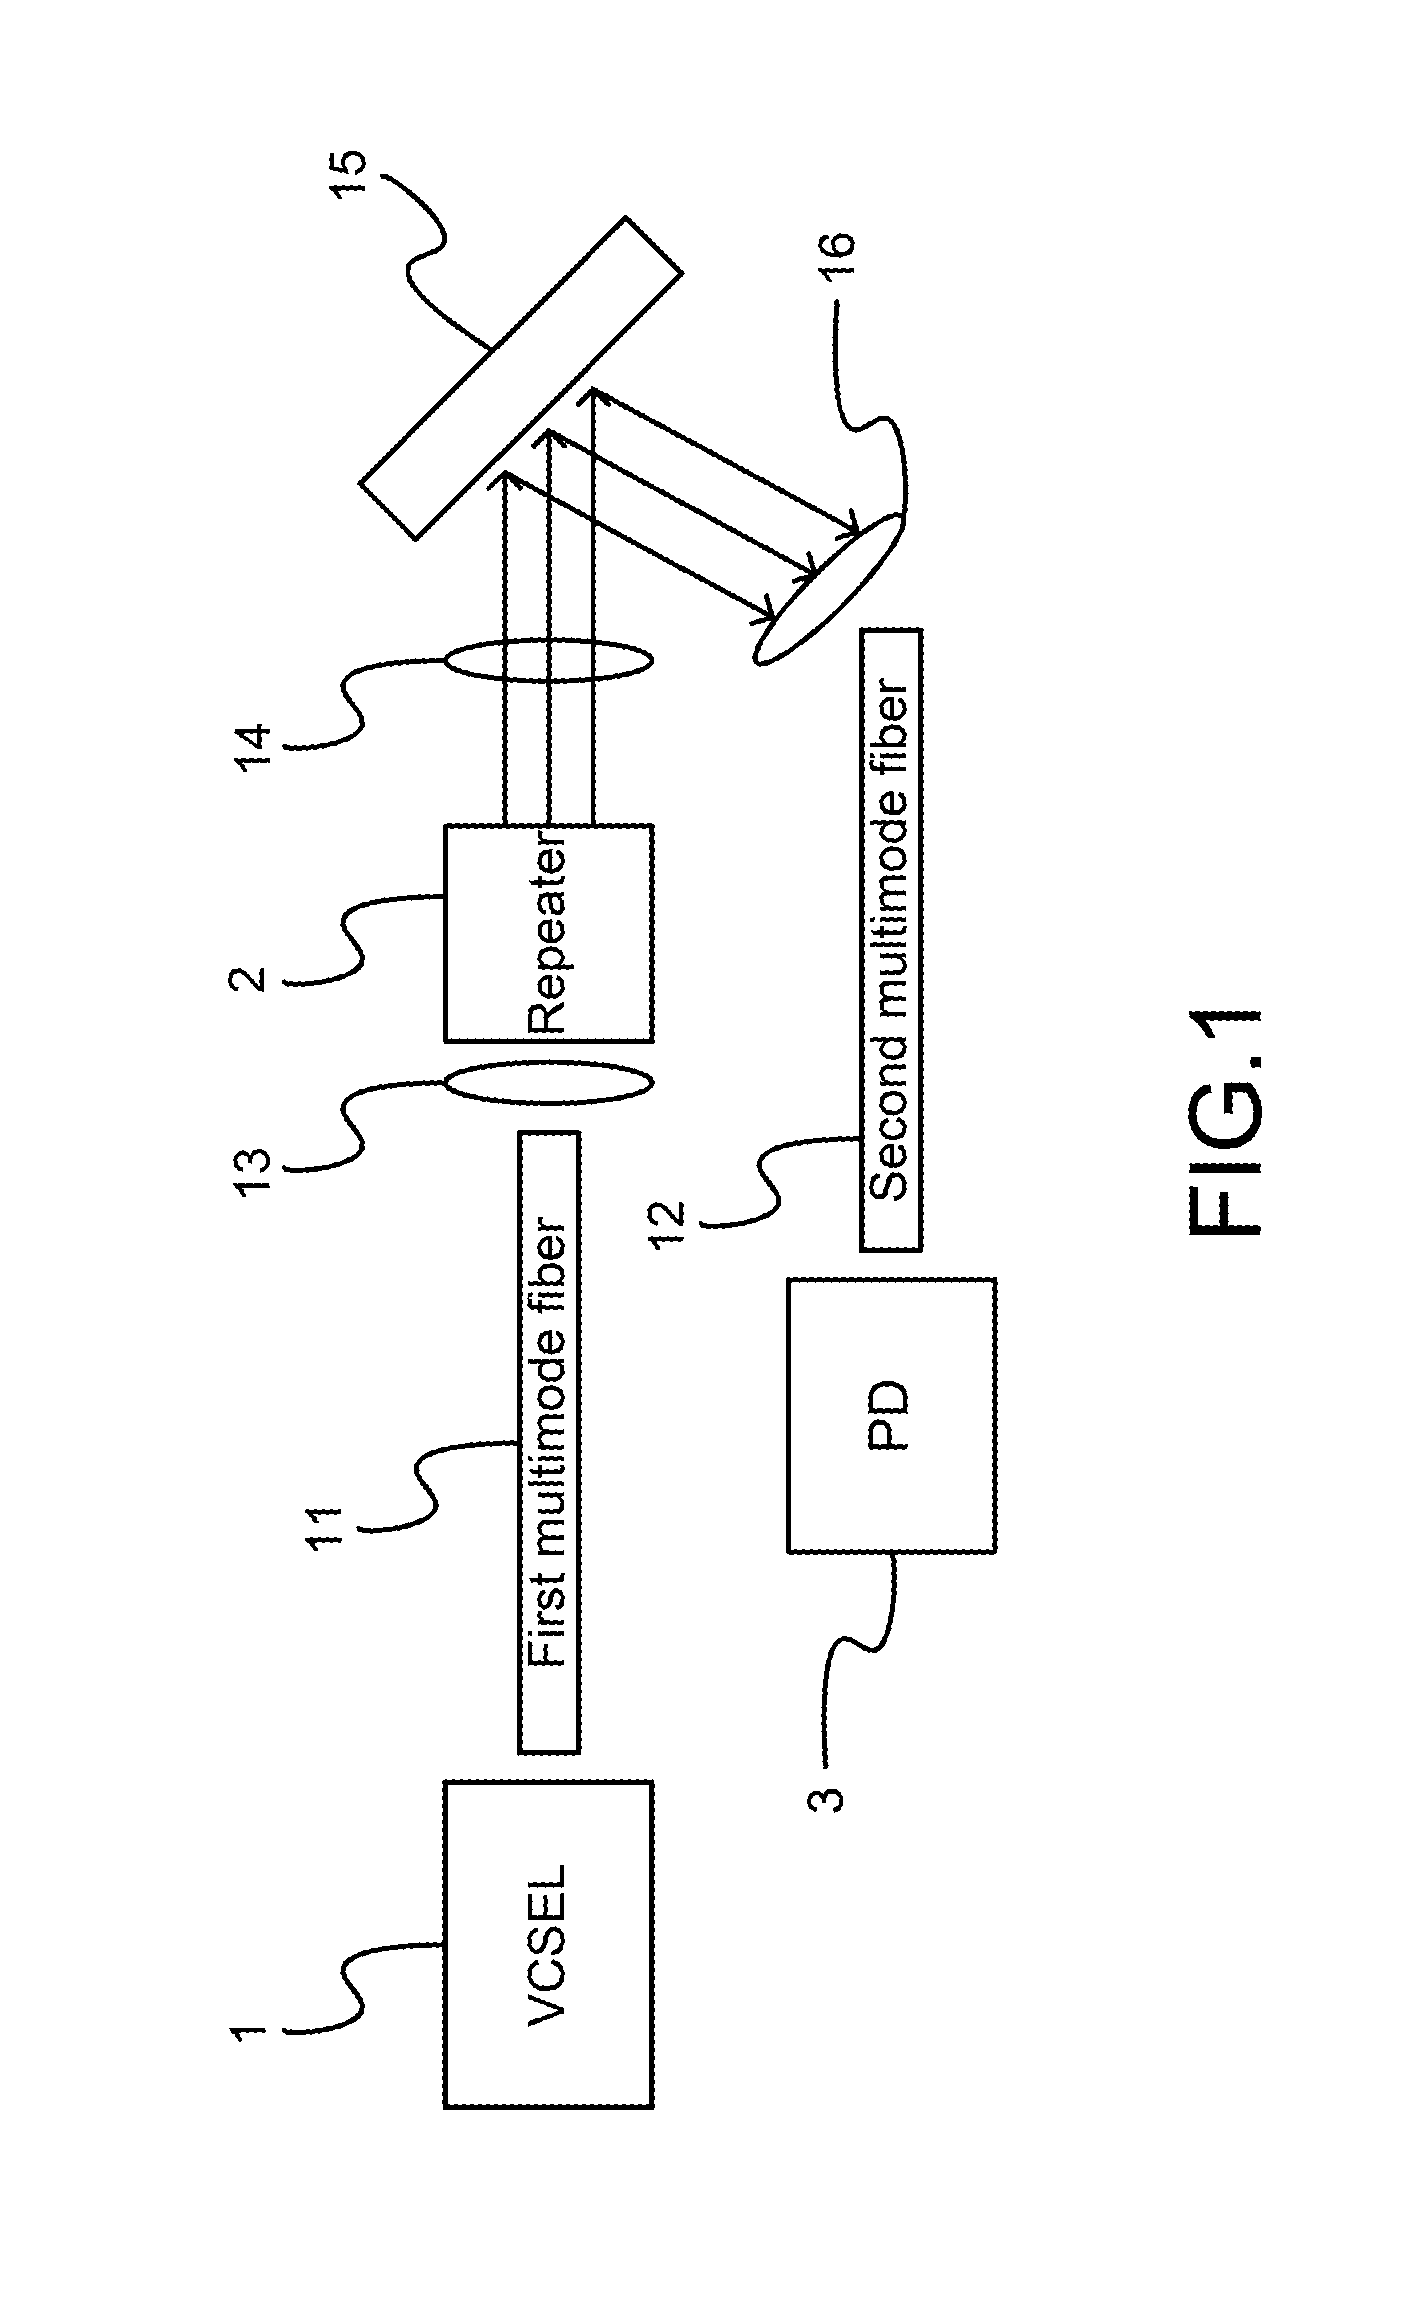 Device of Optical Passive Repeater Used in Optical Multimode communication